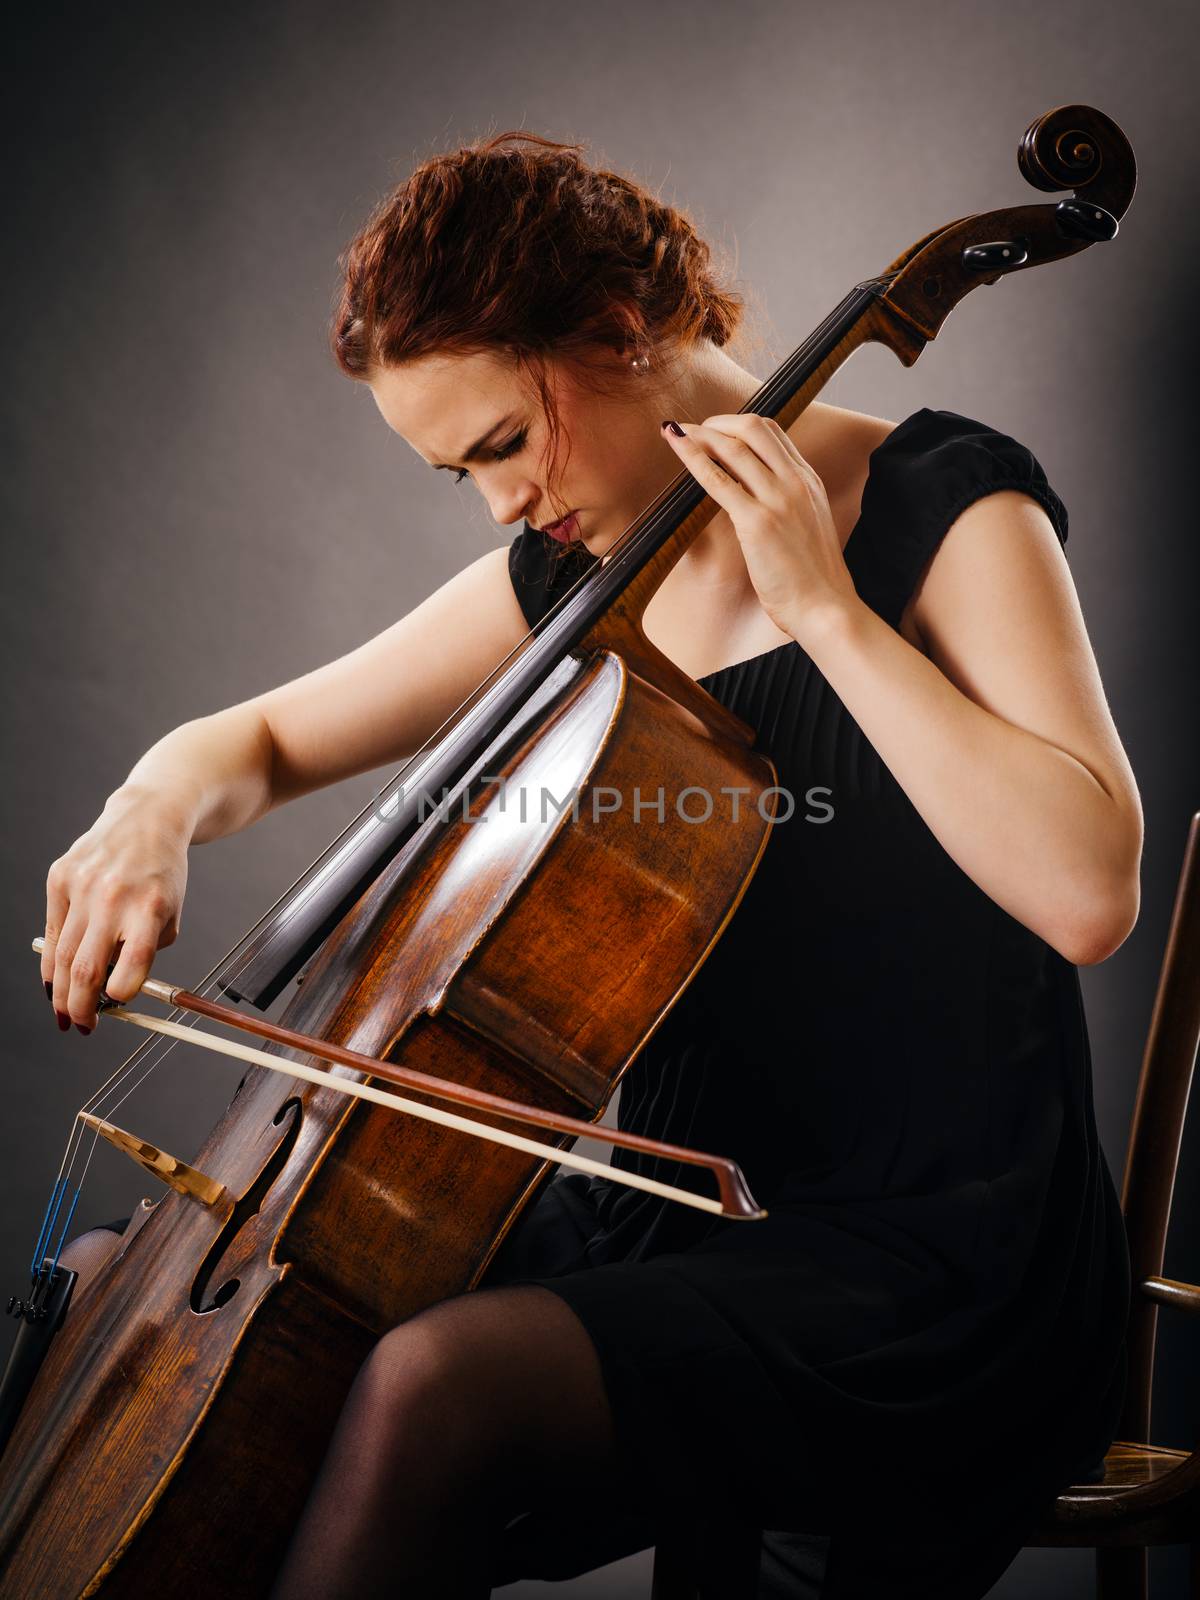 Cello player concentrating on her playing by sumners